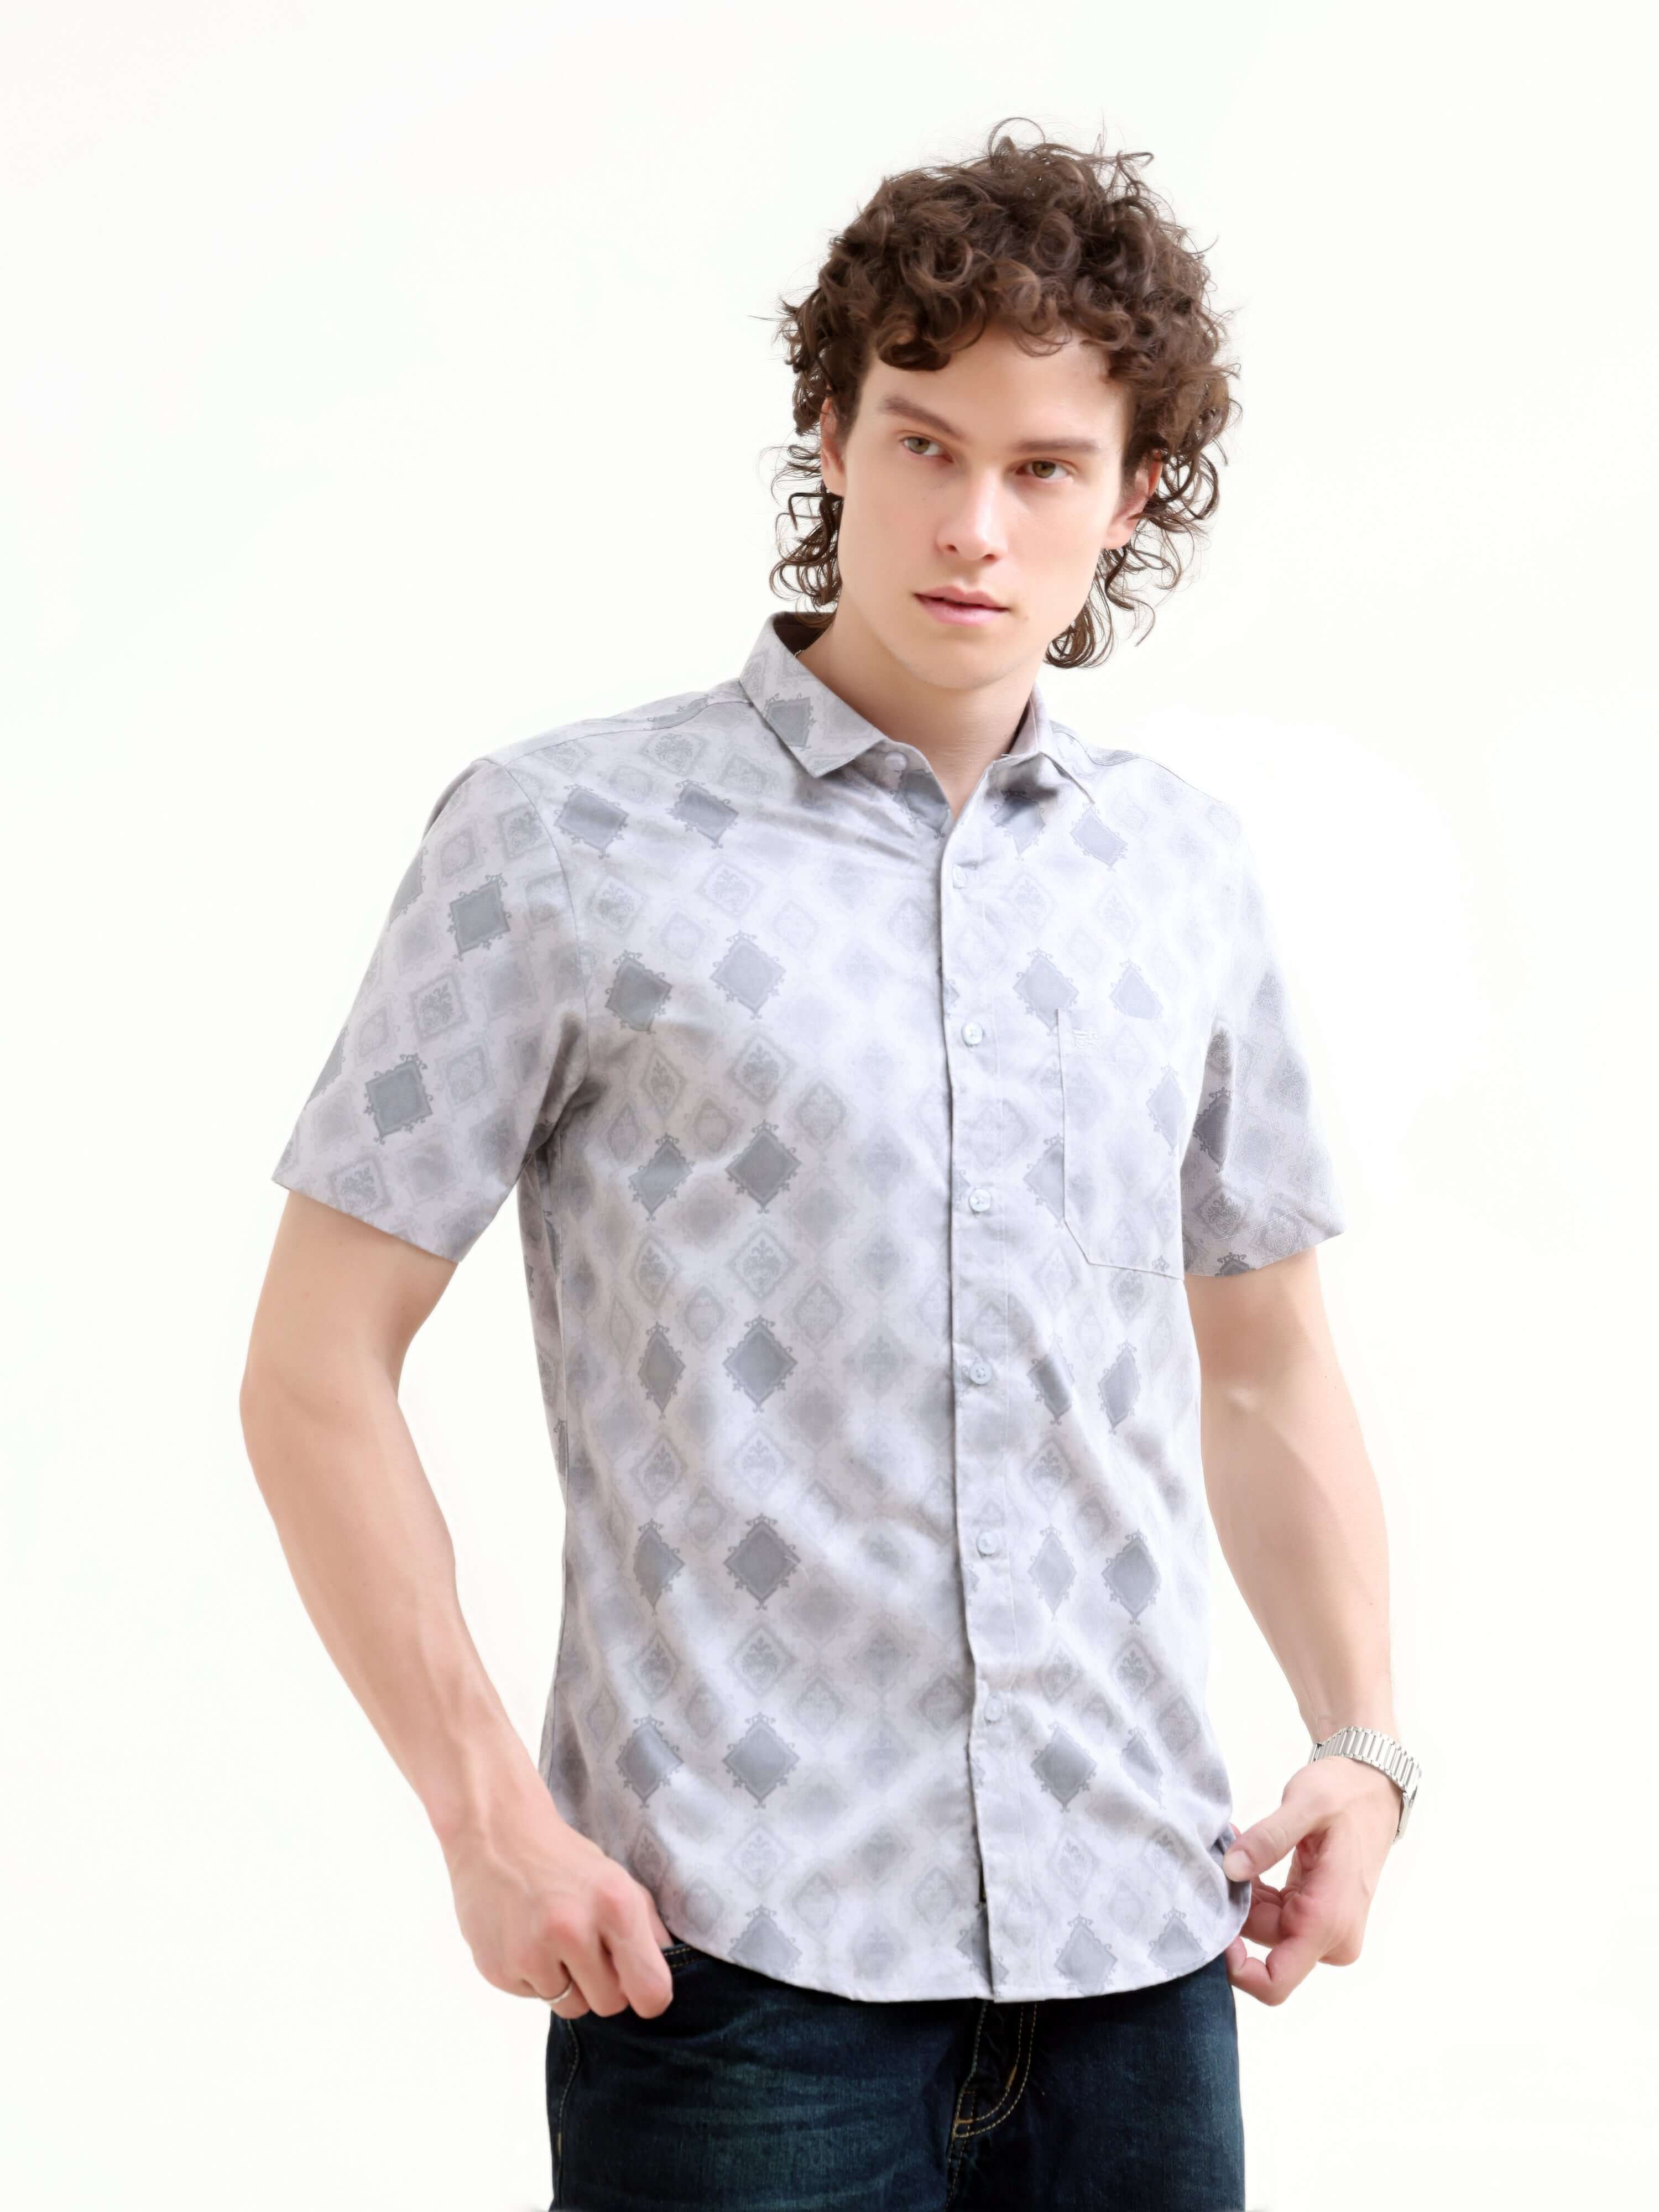 Soren Abstract Floral Shirt - Fresh Summer Style shop online at Estilocus. Embrace summer with the Soren Multi Abstract Floral Shirt. Perfect finesse with a bold print for any event. Shop the latest men's casual trend now!